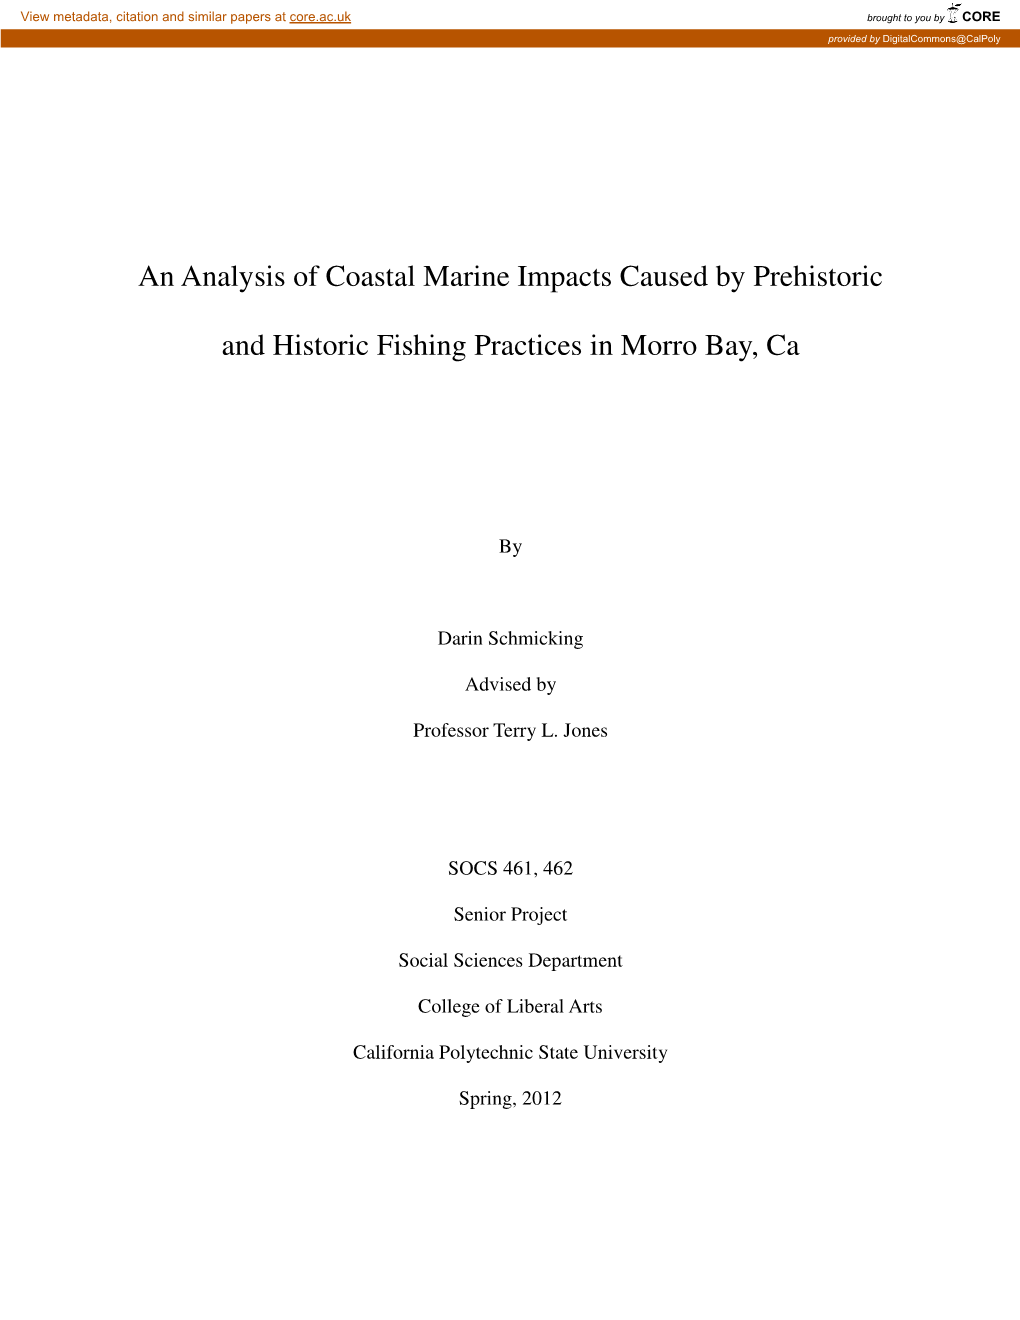 An Analysis of Coastal Marine Impacts Caused by Prehistoric and Historic